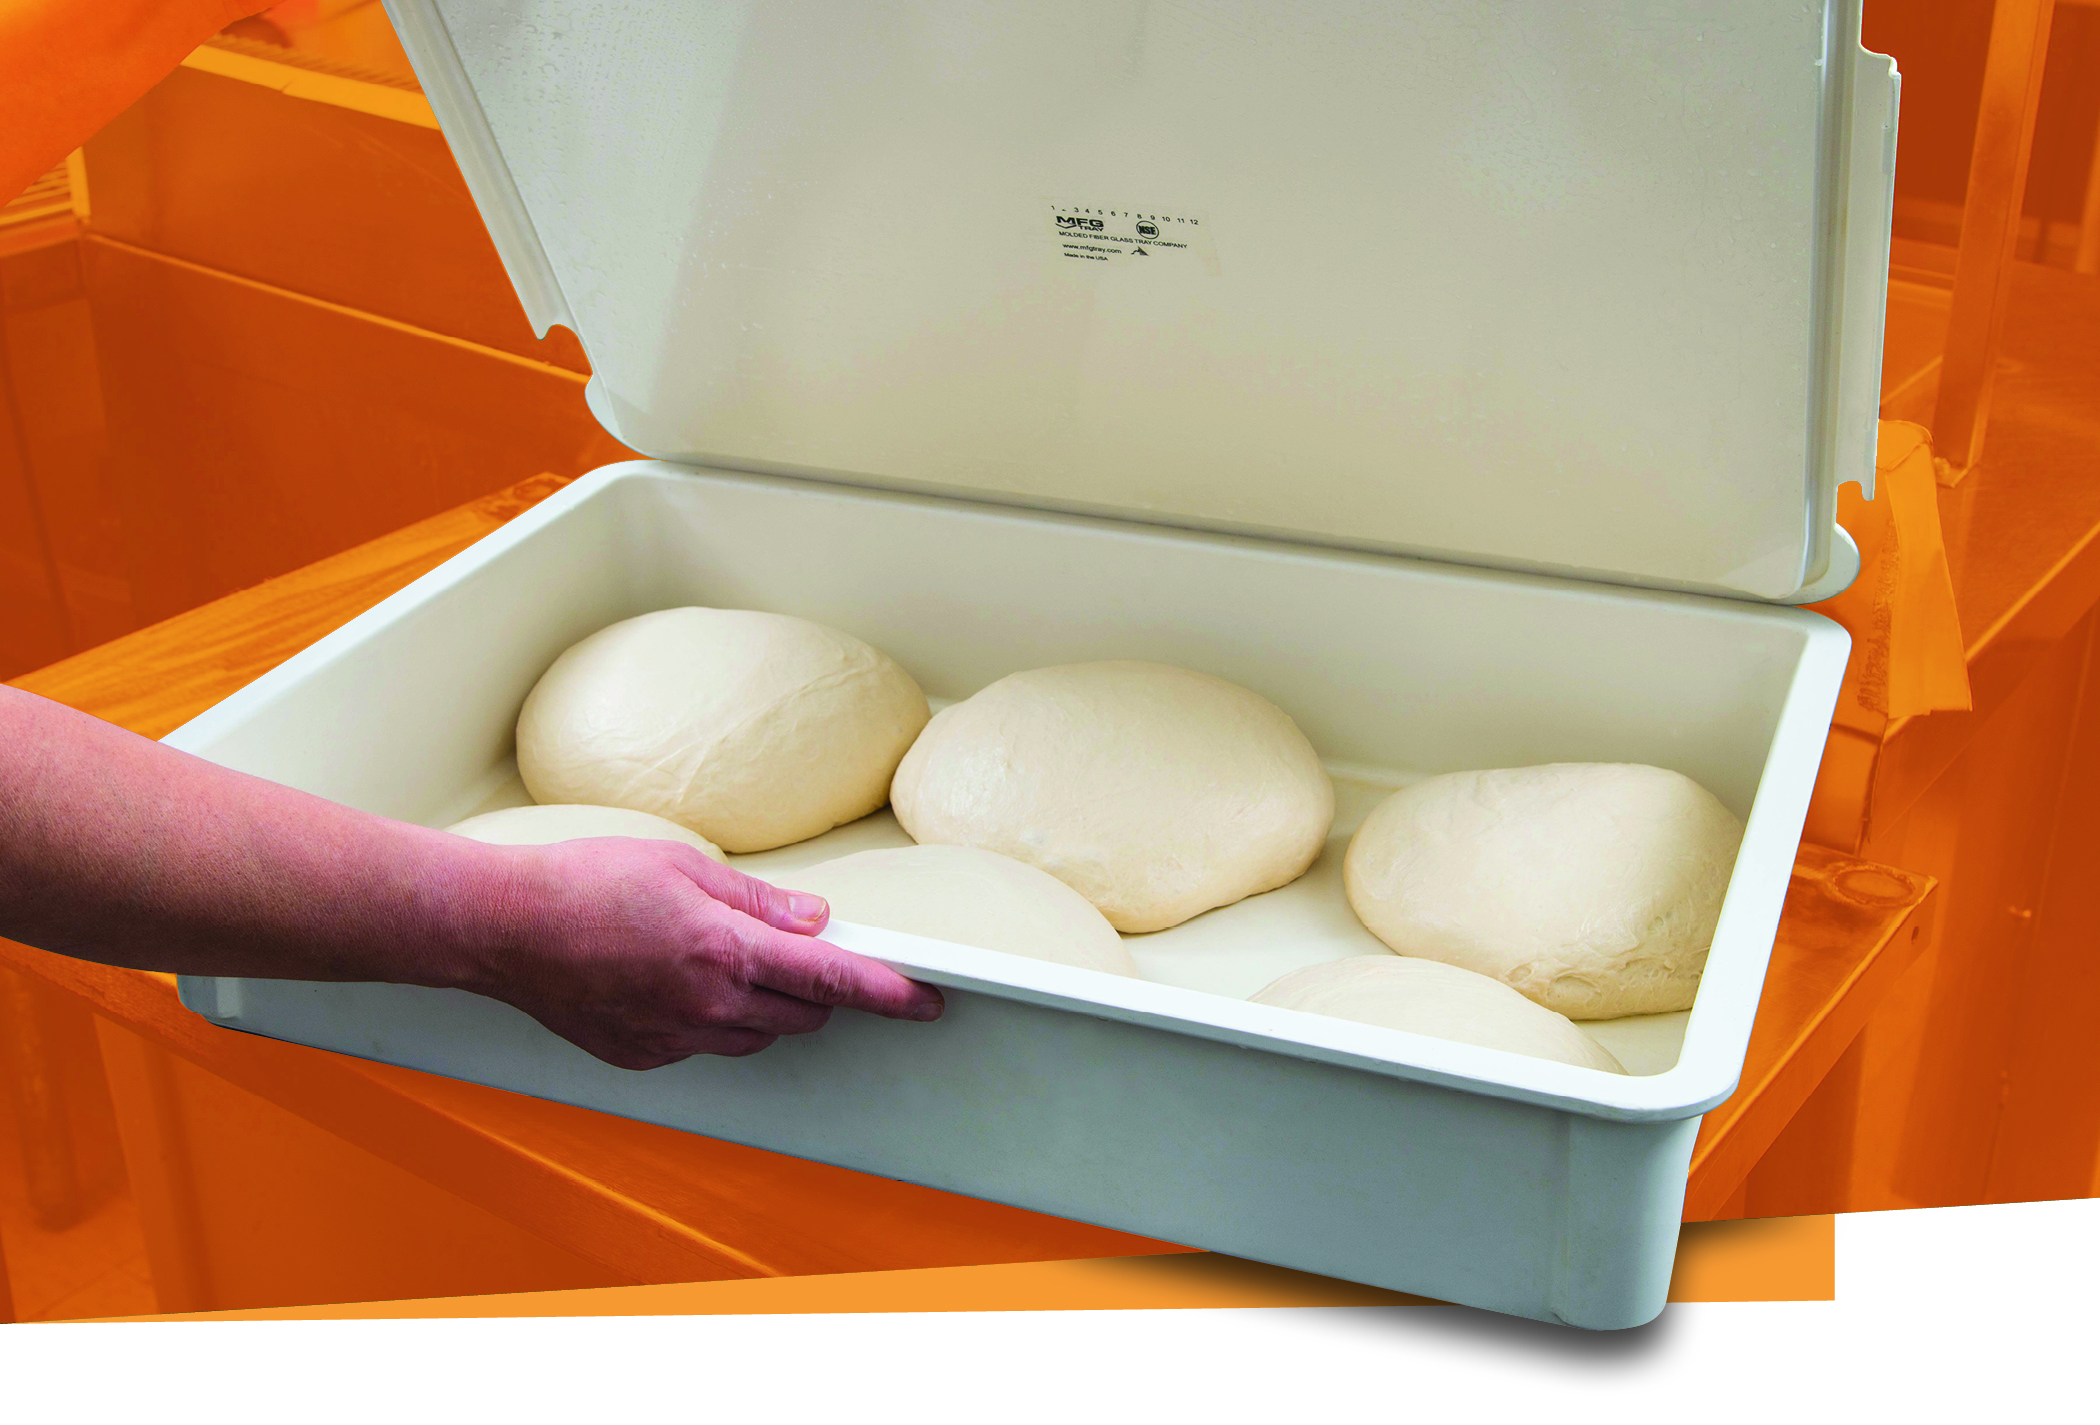 MFG Tray accommodates all aspects of food handling